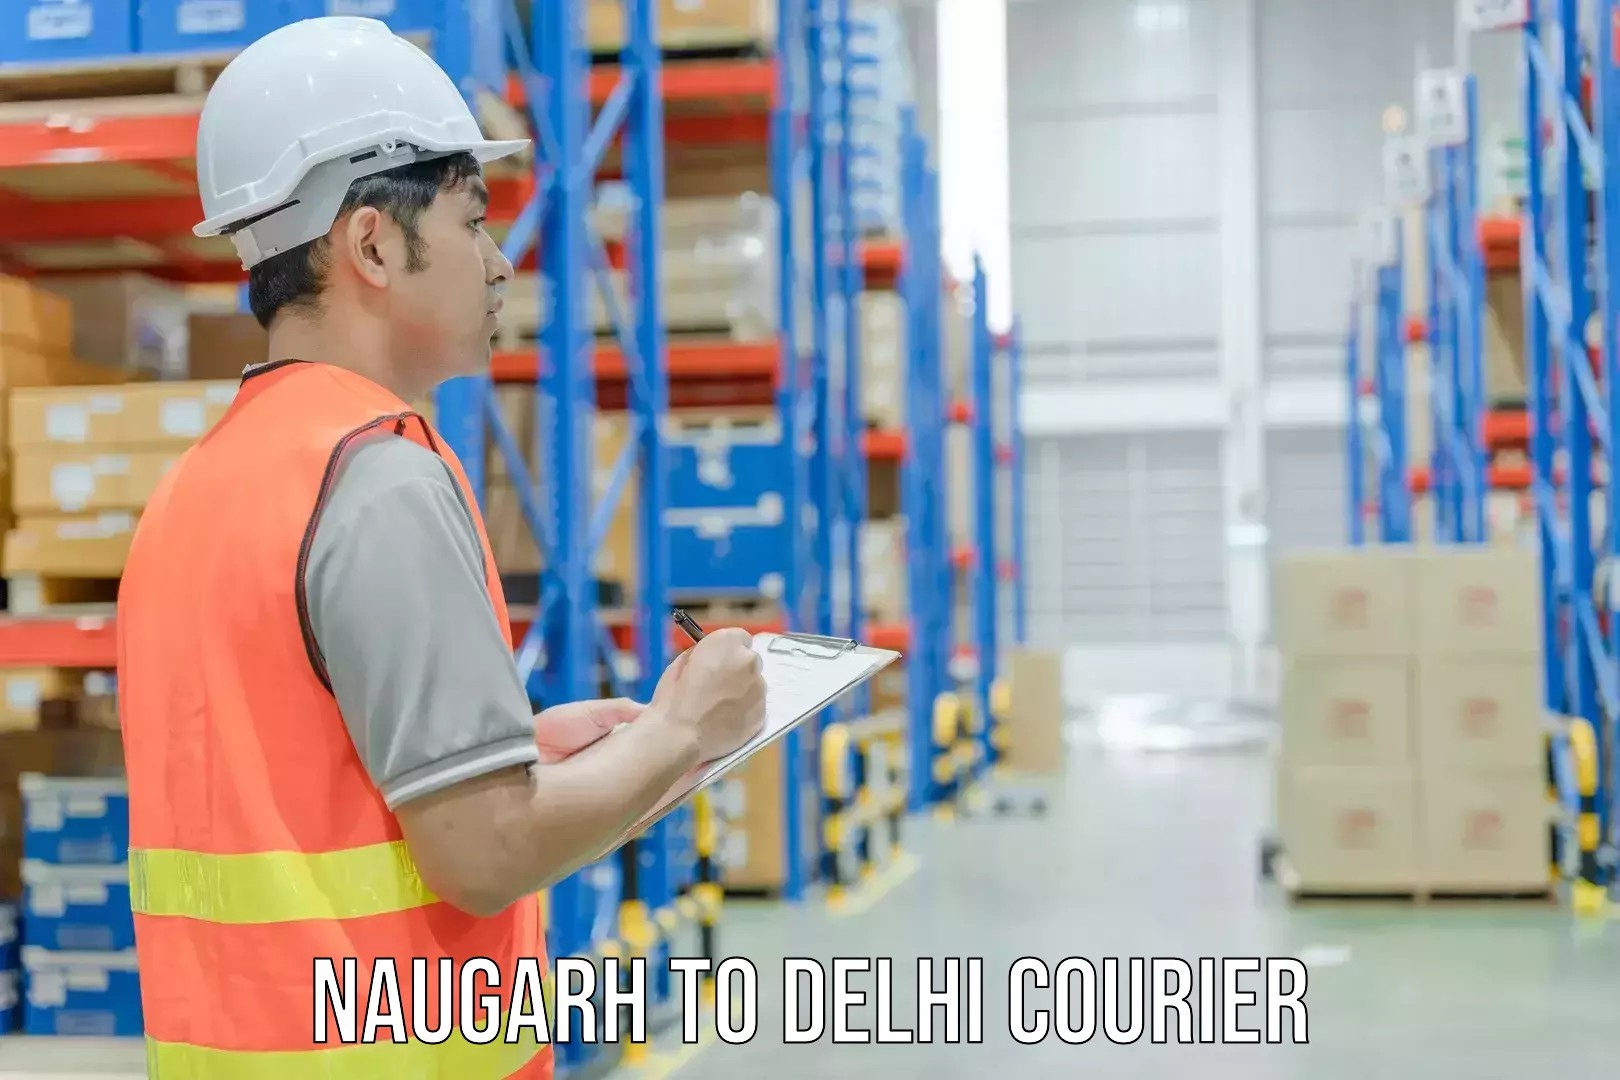 Professional courier handling Naugarh to NCR